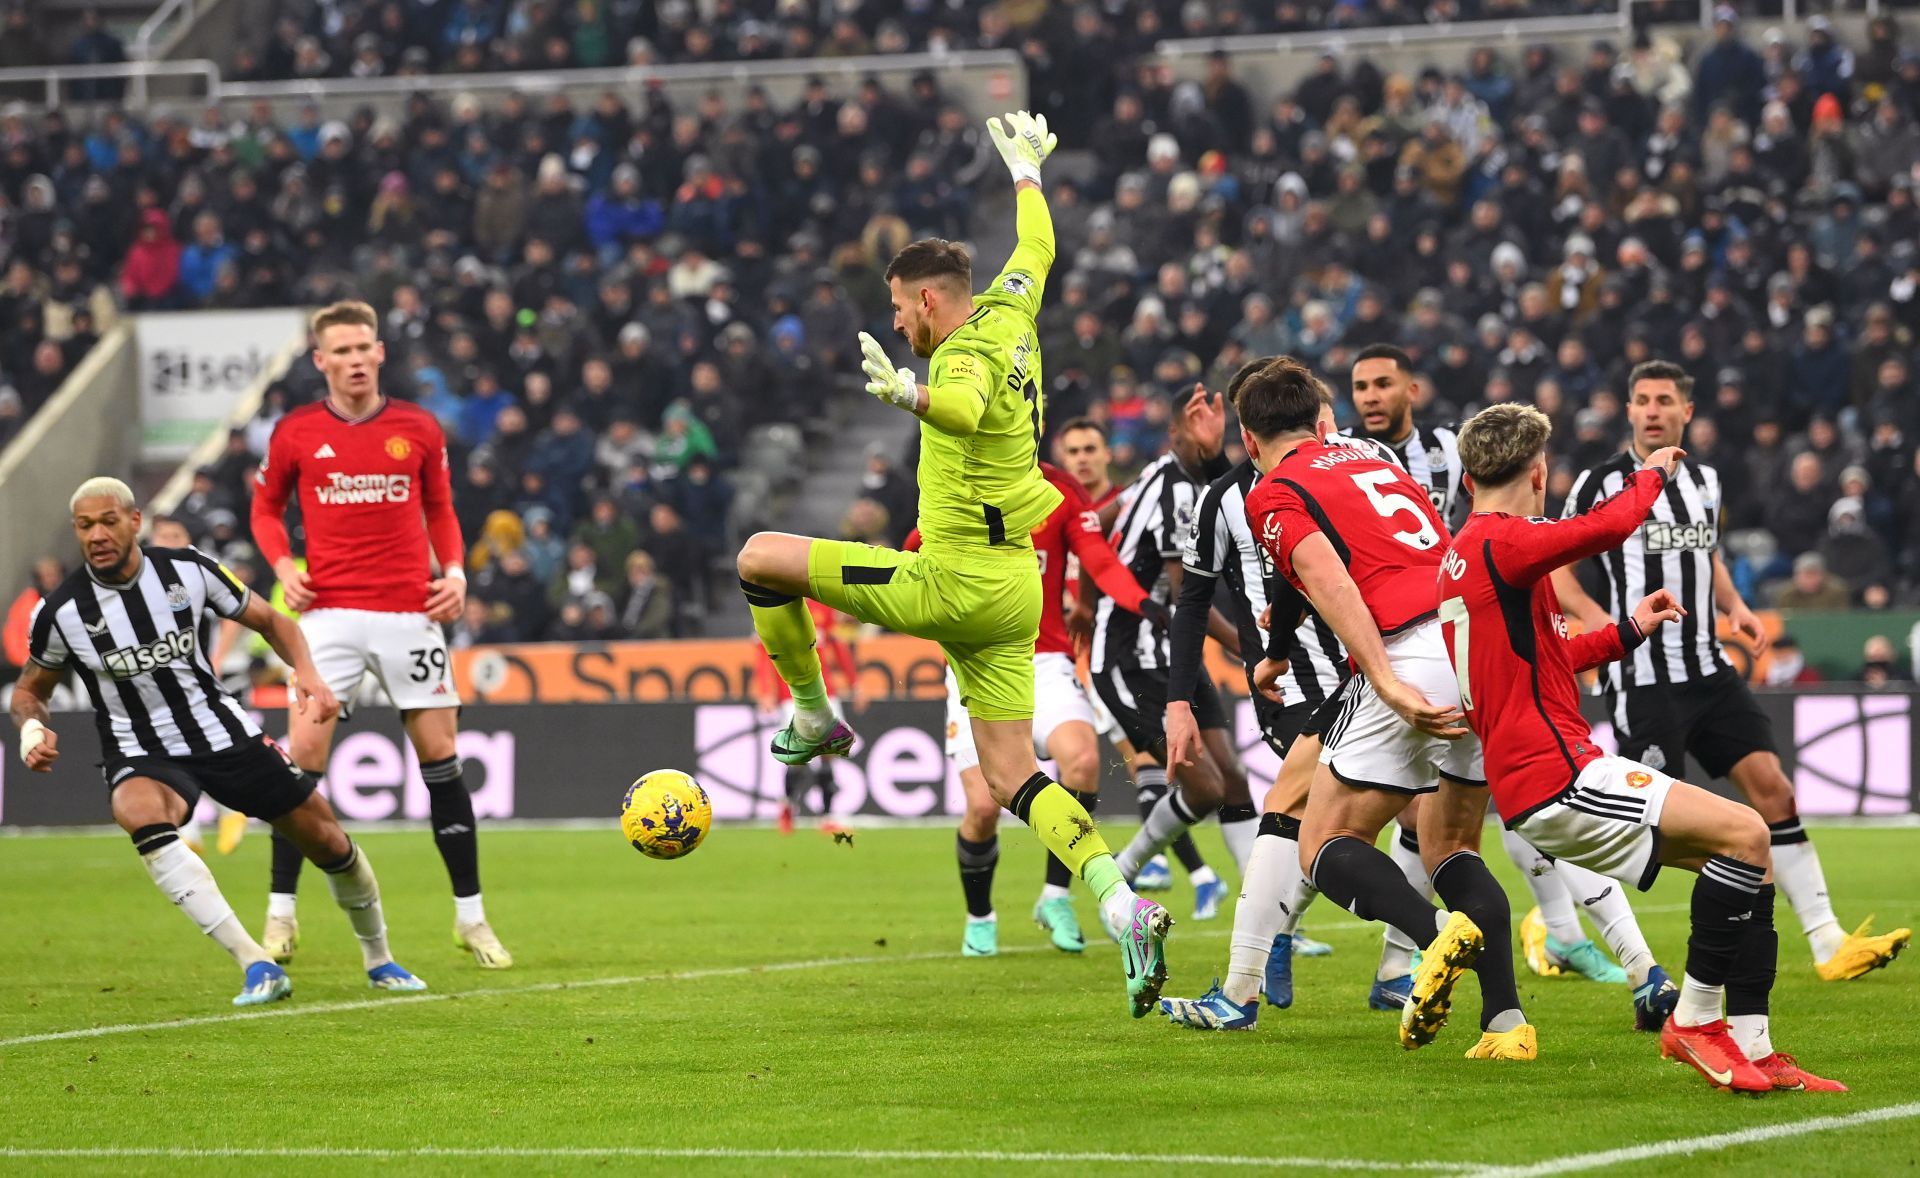 The Red Devils were poor against Newcastle.